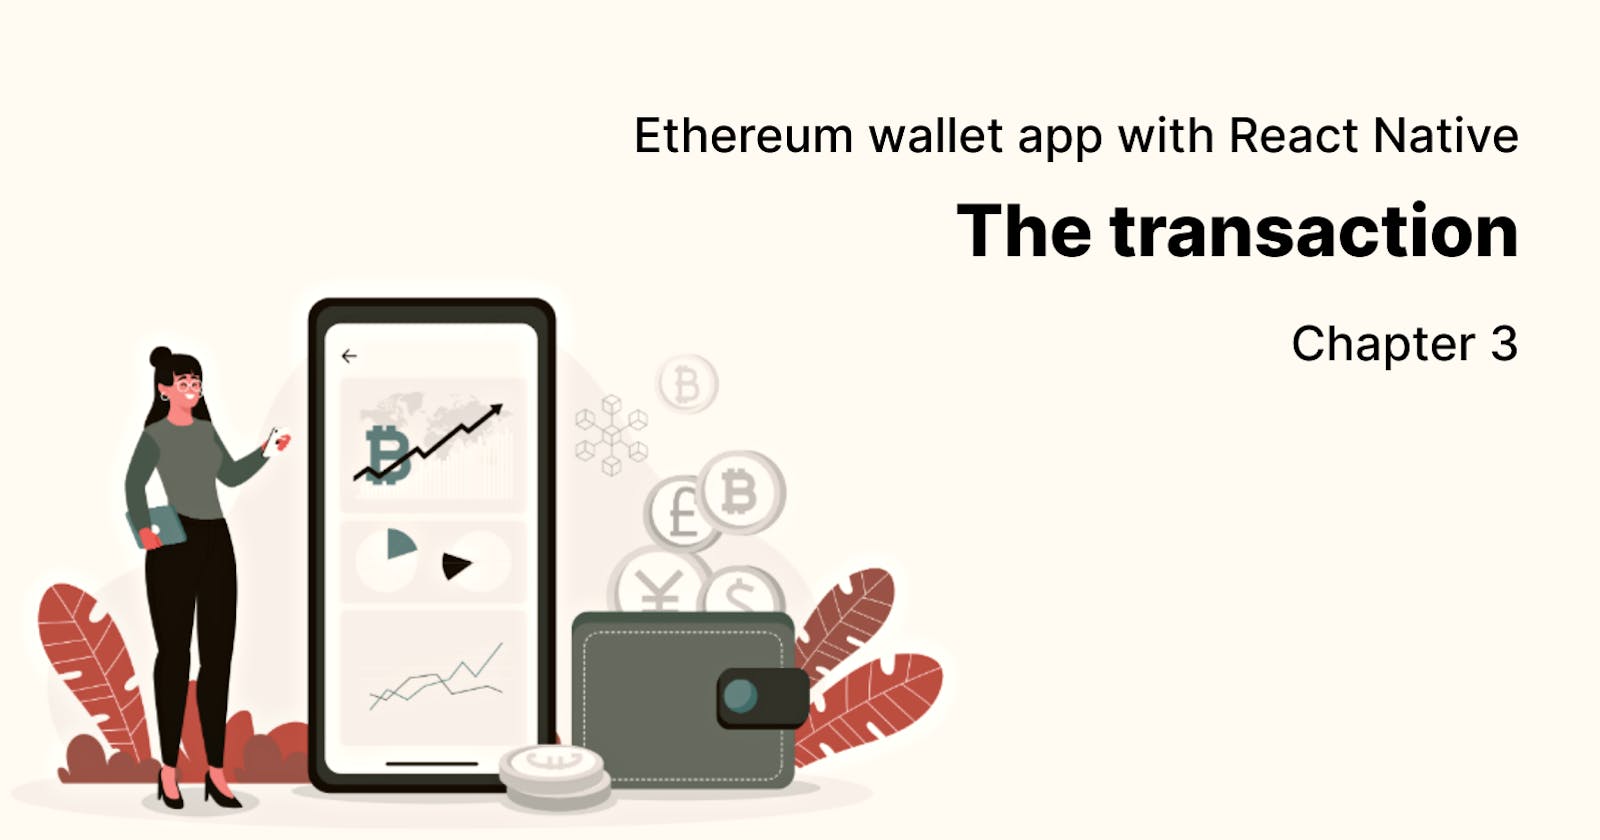 How to build an Ethereum wallet app with React Native | Chapter 3 | The transaction